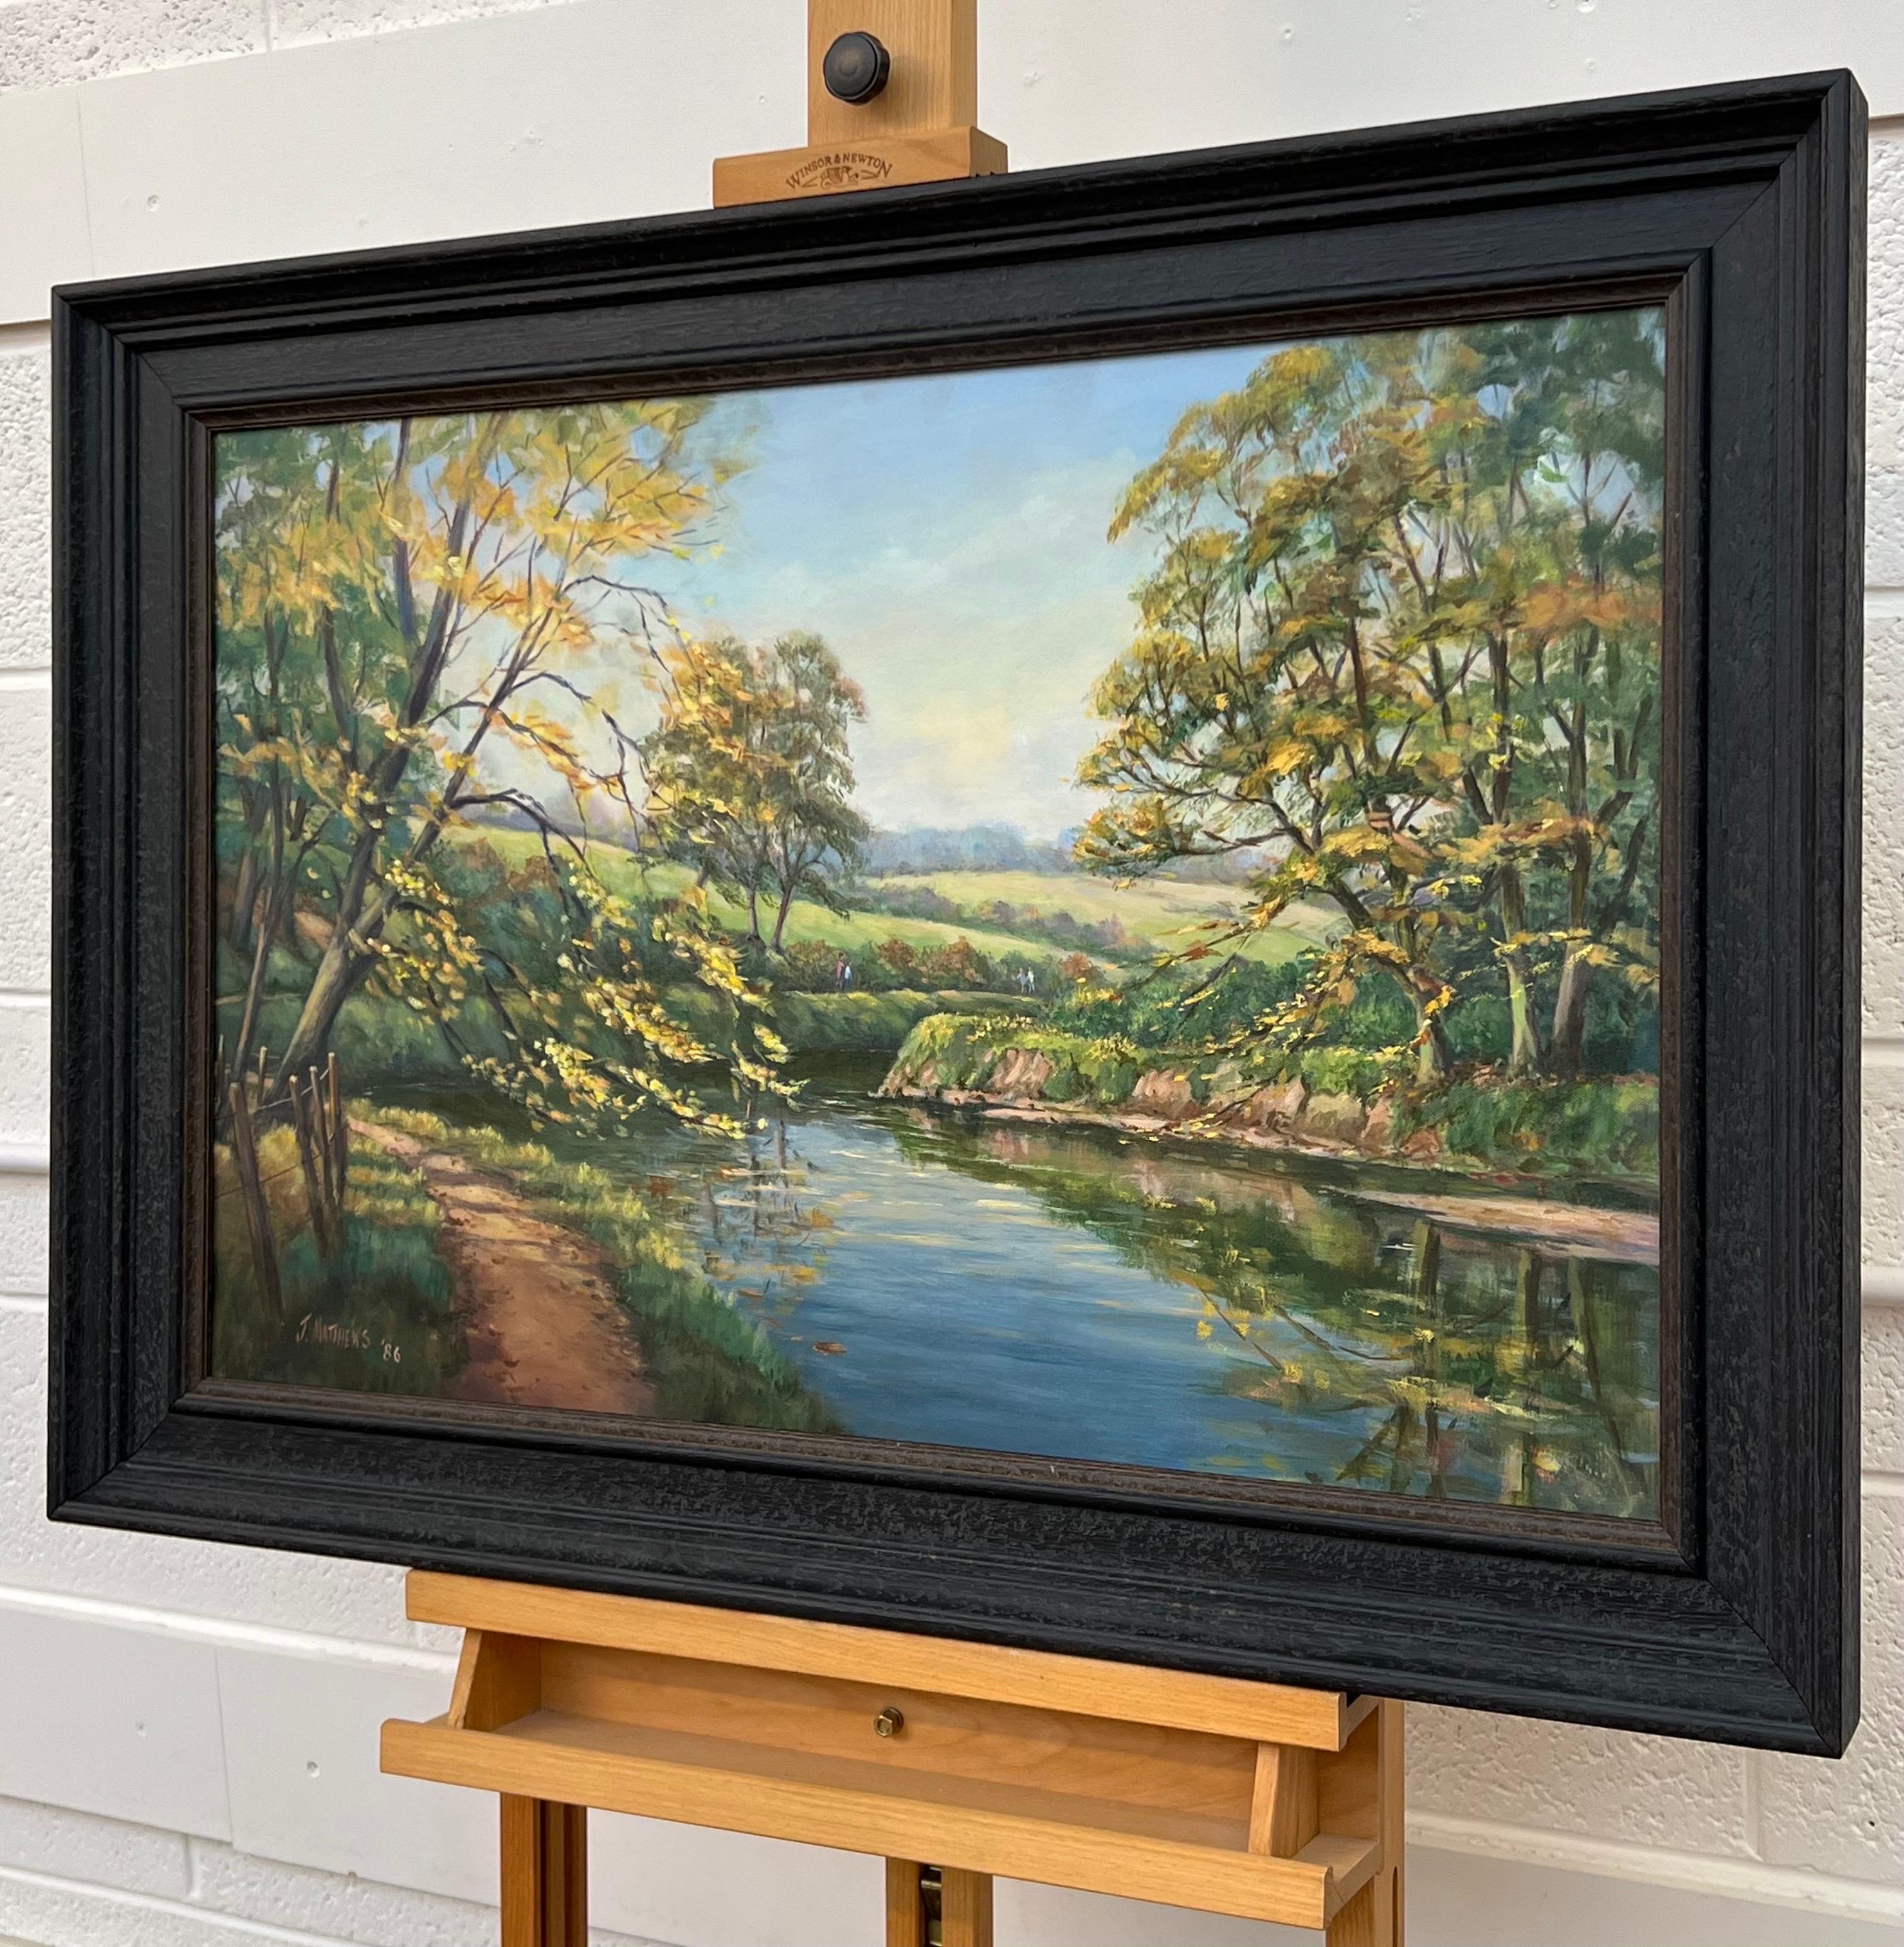 Lush Tree Lined Towpath on the River Lagan in Northern Ireland by 20th Century Irish Artist, Jim Matthews

Art measures 30 x 20 inches
Frame measures 36 x 26 inches

This unique original painting, signed by J. Mathews in 1986, portrays a tranquil